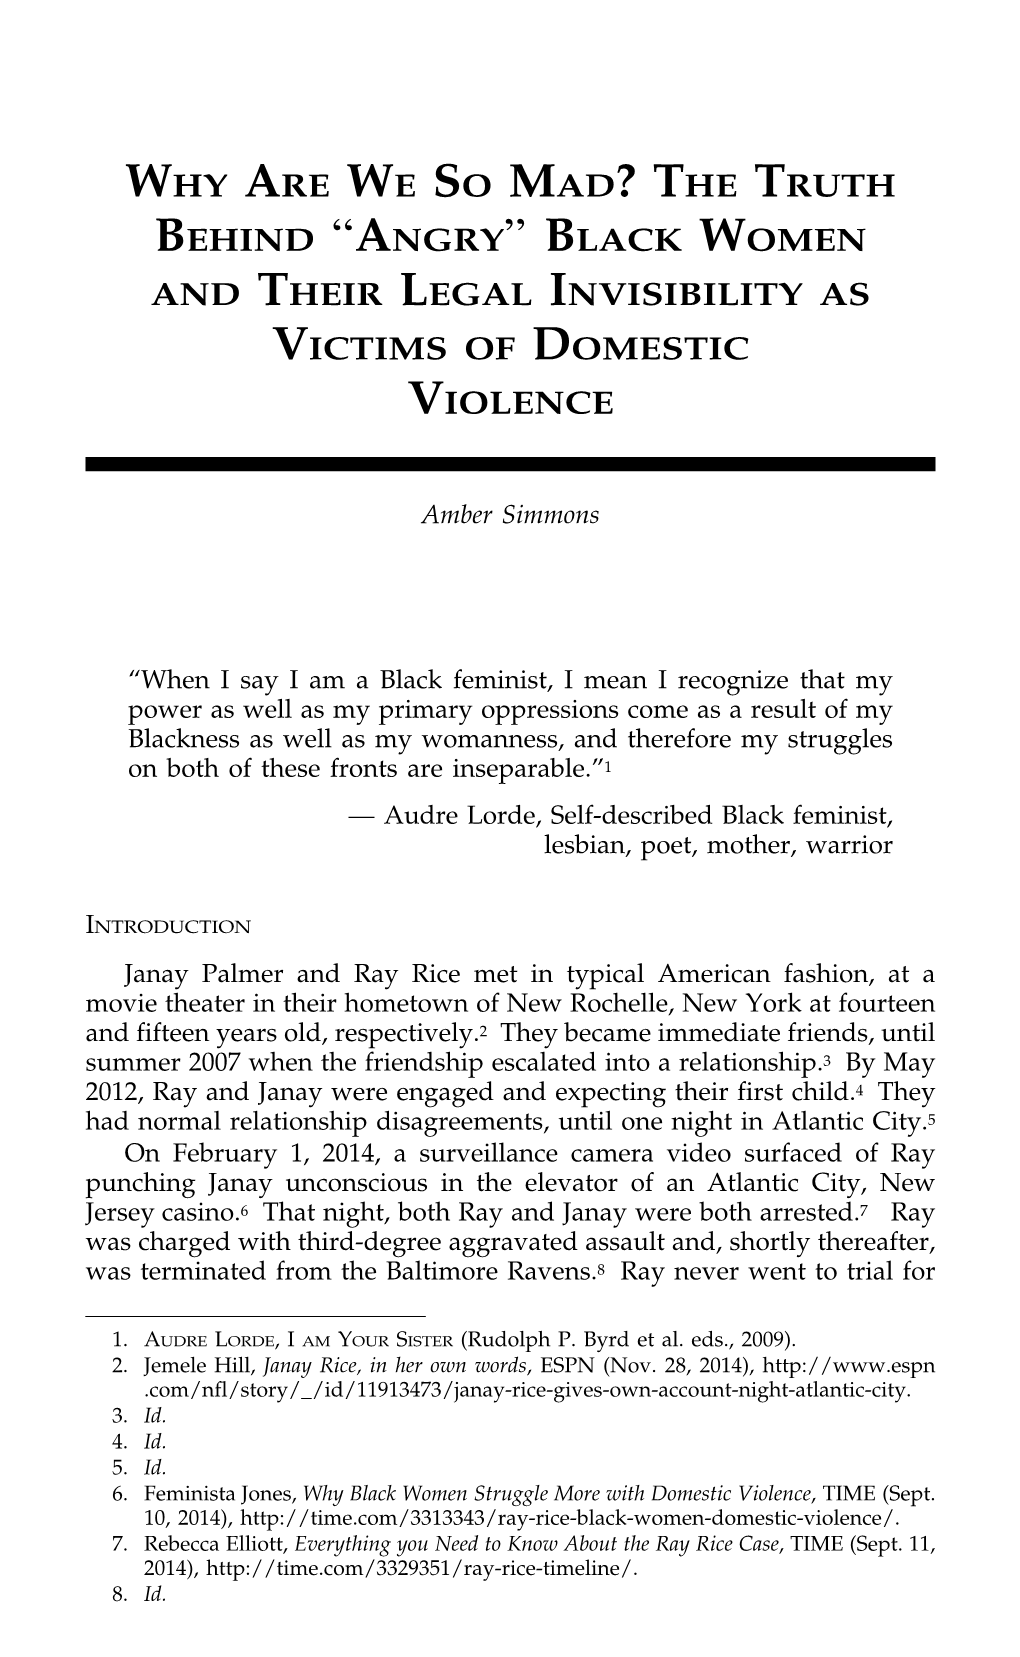 “Angry” Black Women and Their Legal Invisibility As Victims of Domestic Violence